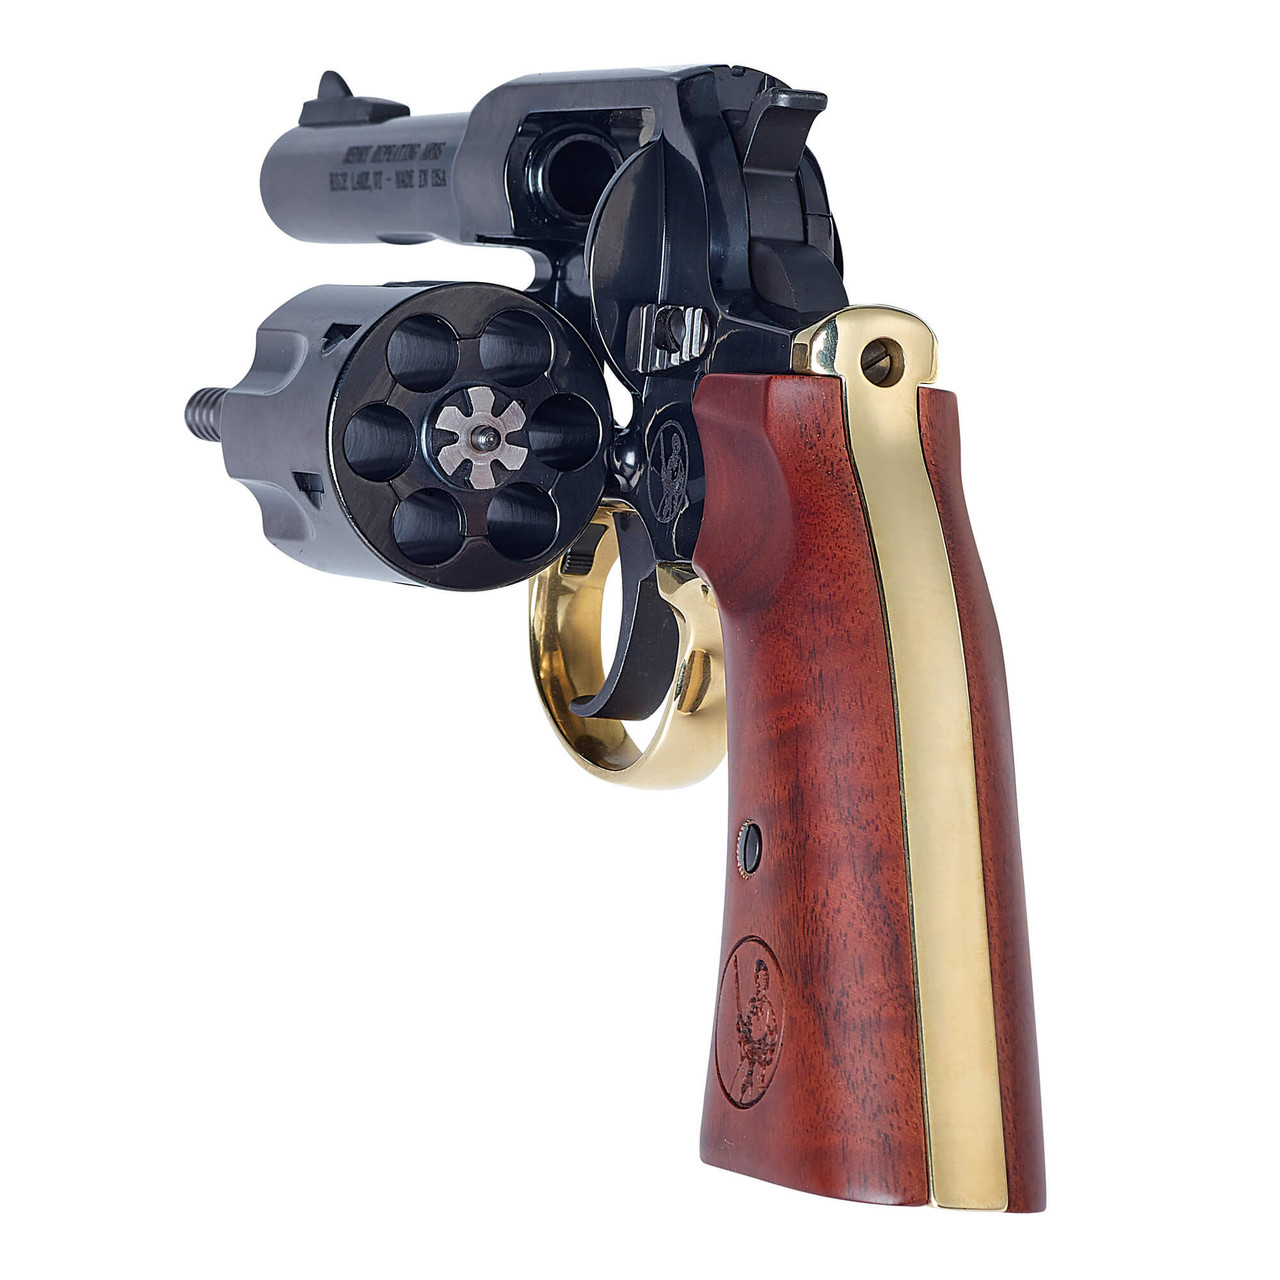 Wilde Built Tactical Henry Big Boy Revolver in .357 Magnum Angled View